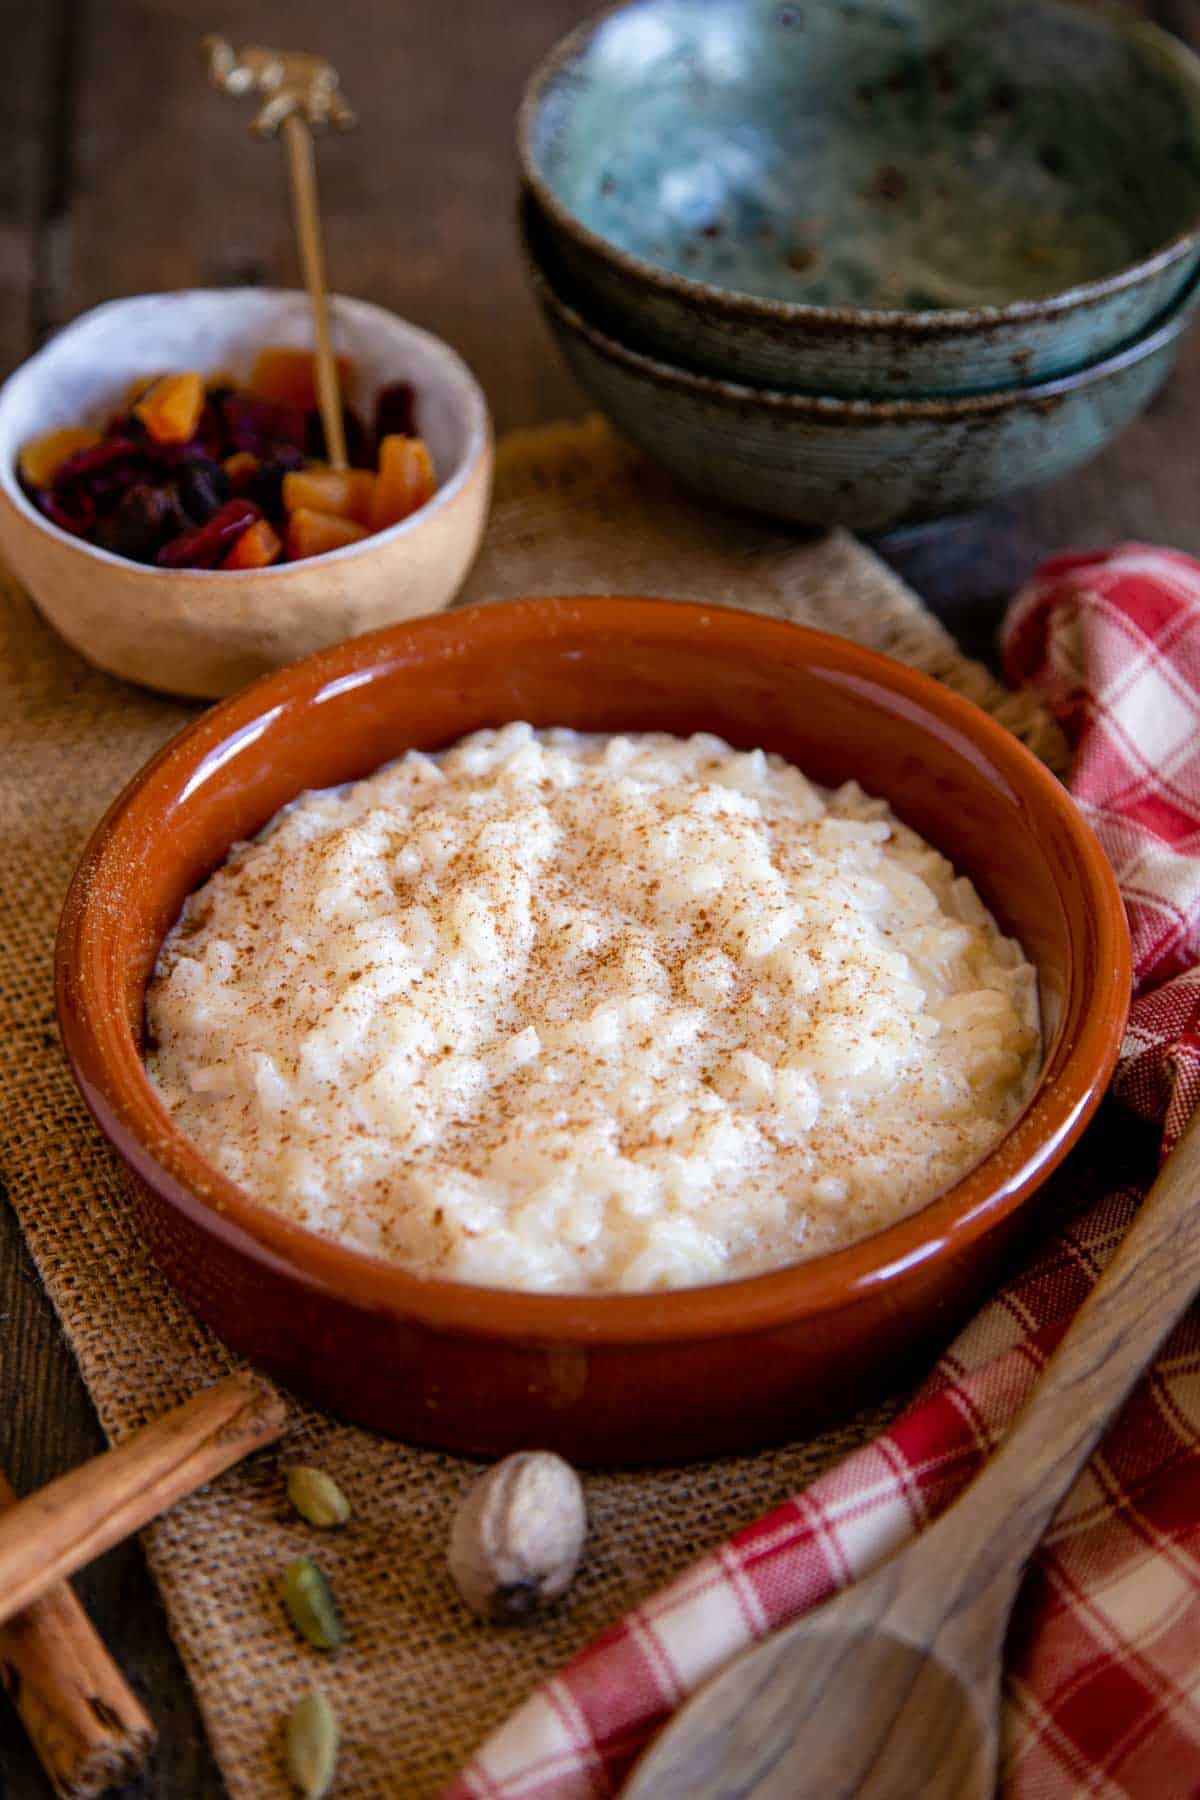 A dish of creamy rice pudding, dusted with a grating of nutmeg.